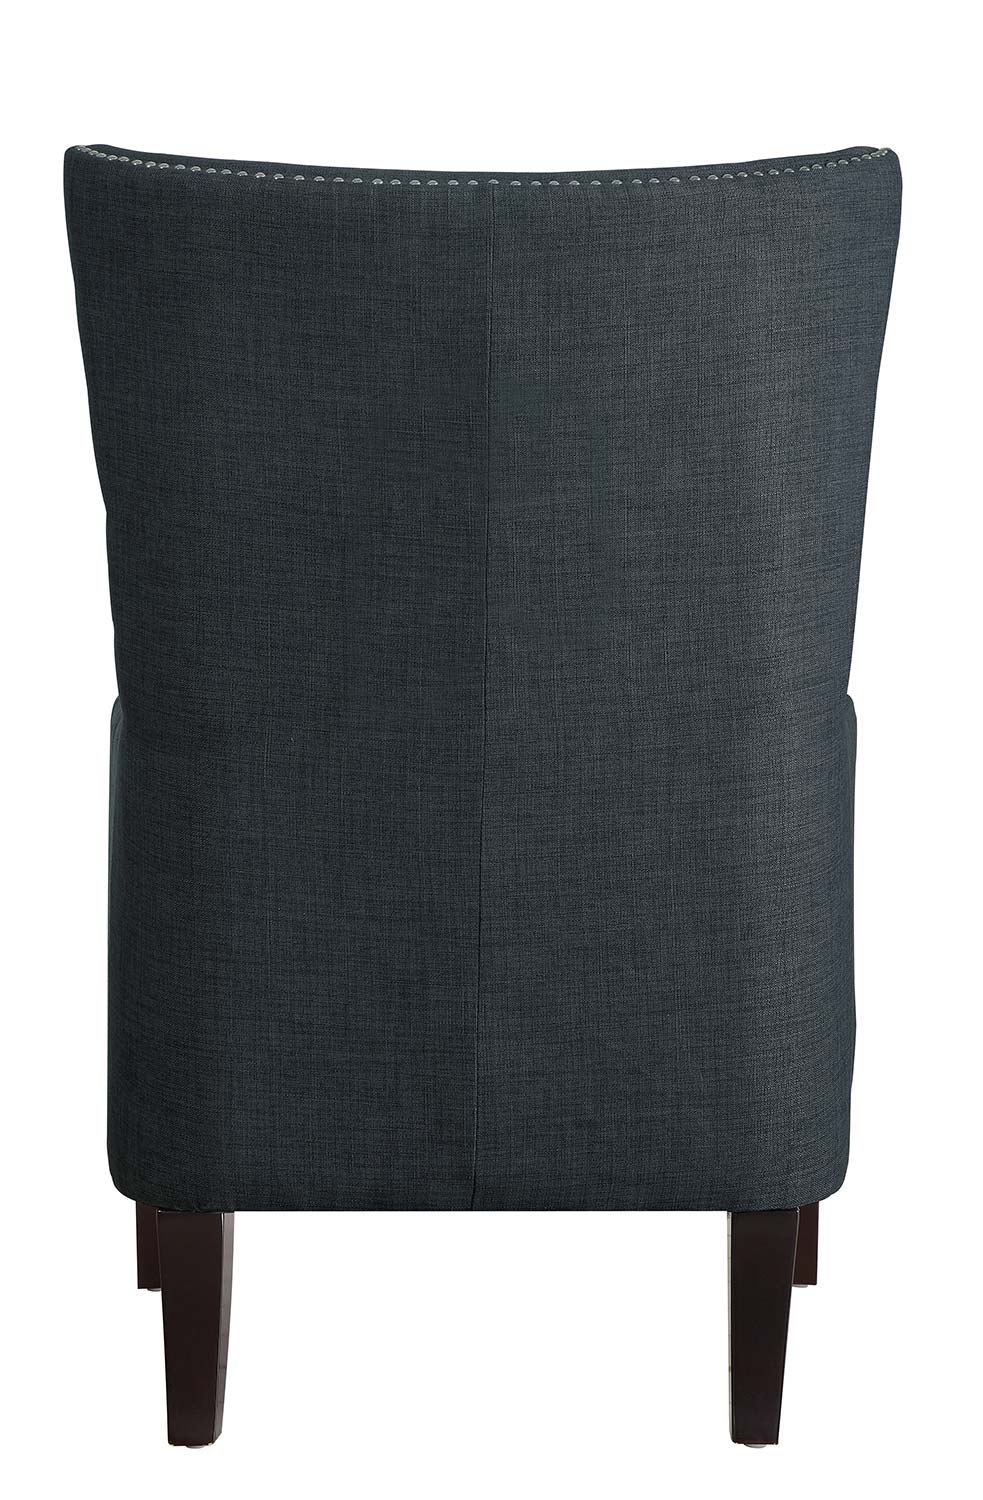 Homelegance Avina Accent Chair - Charcoal